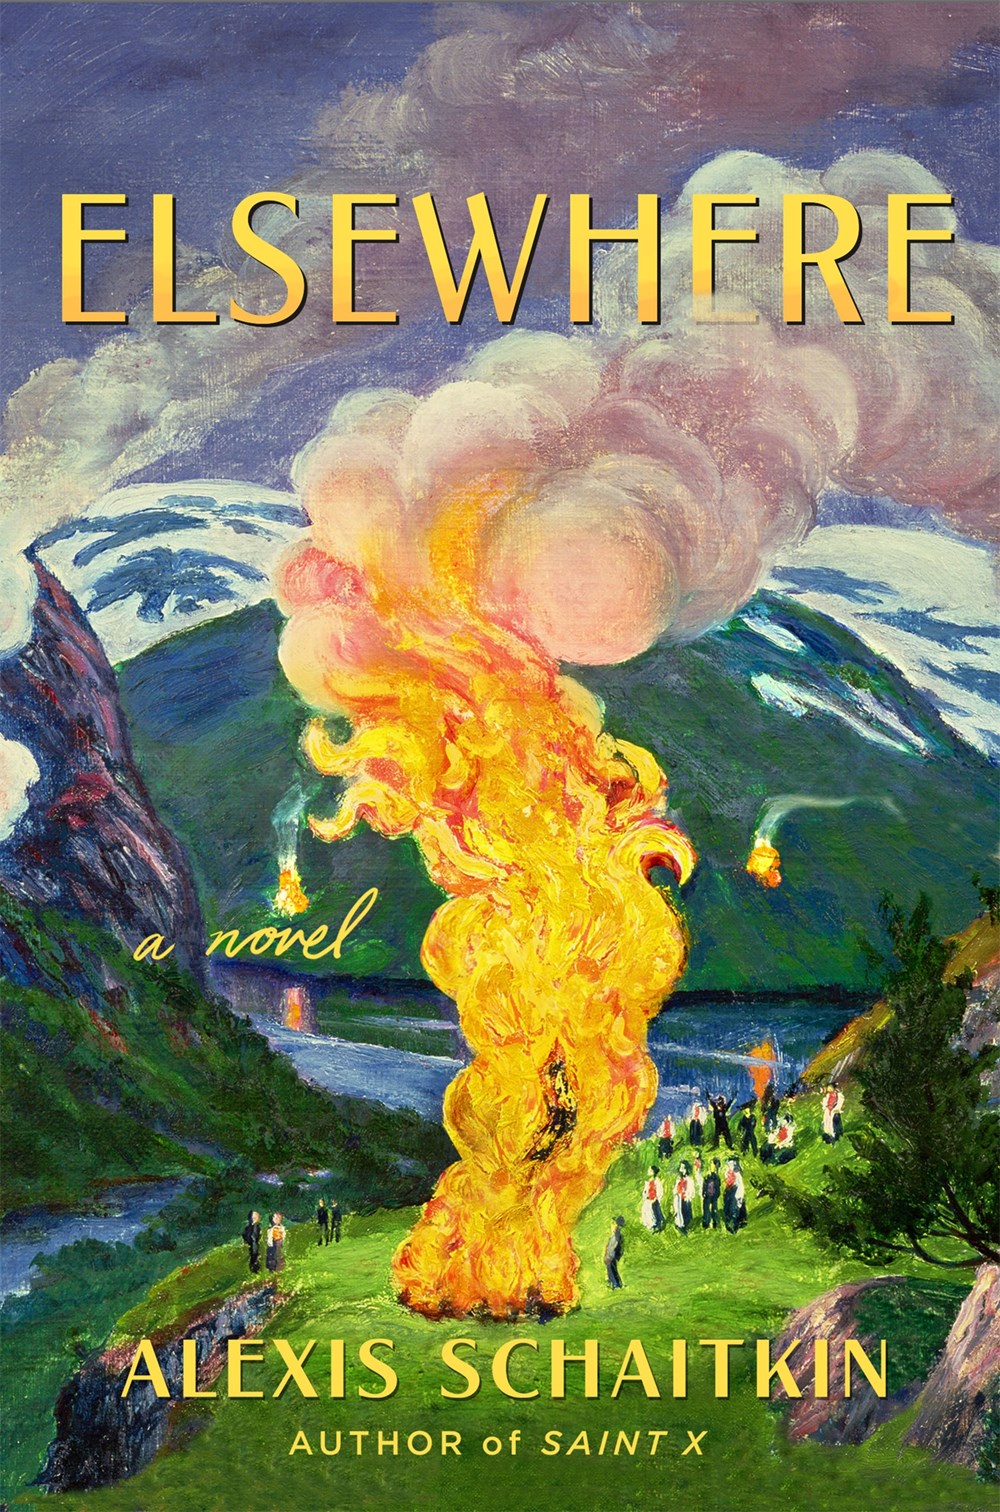 Review – Elsewhere